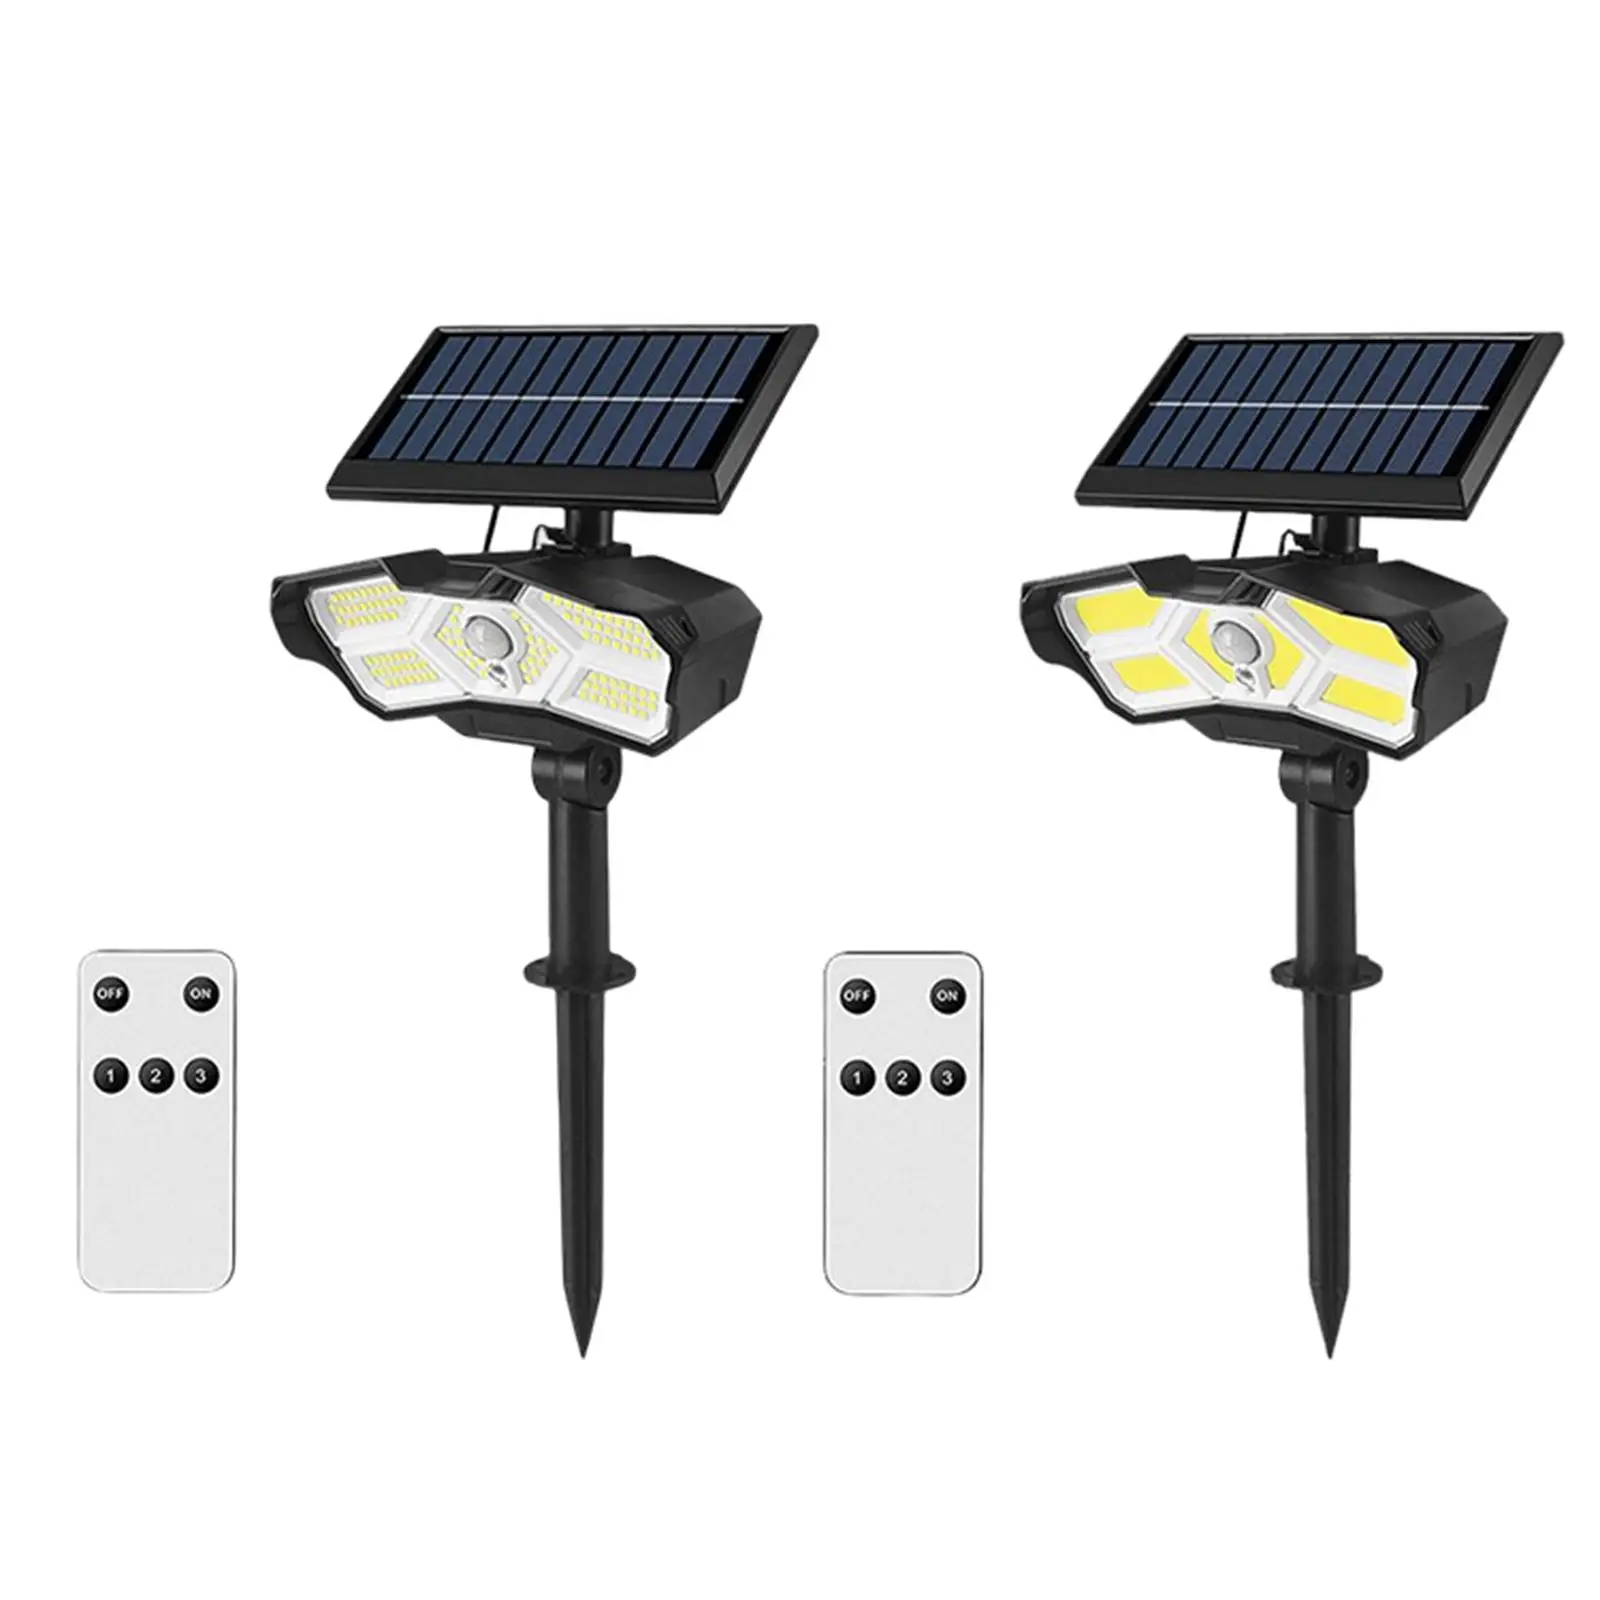 Outdoor Solar Lights 3 Lighting Modes Lamp with Remote Control Lighting Path Lights Solar Garden Lights for Yard Driveway Lawn